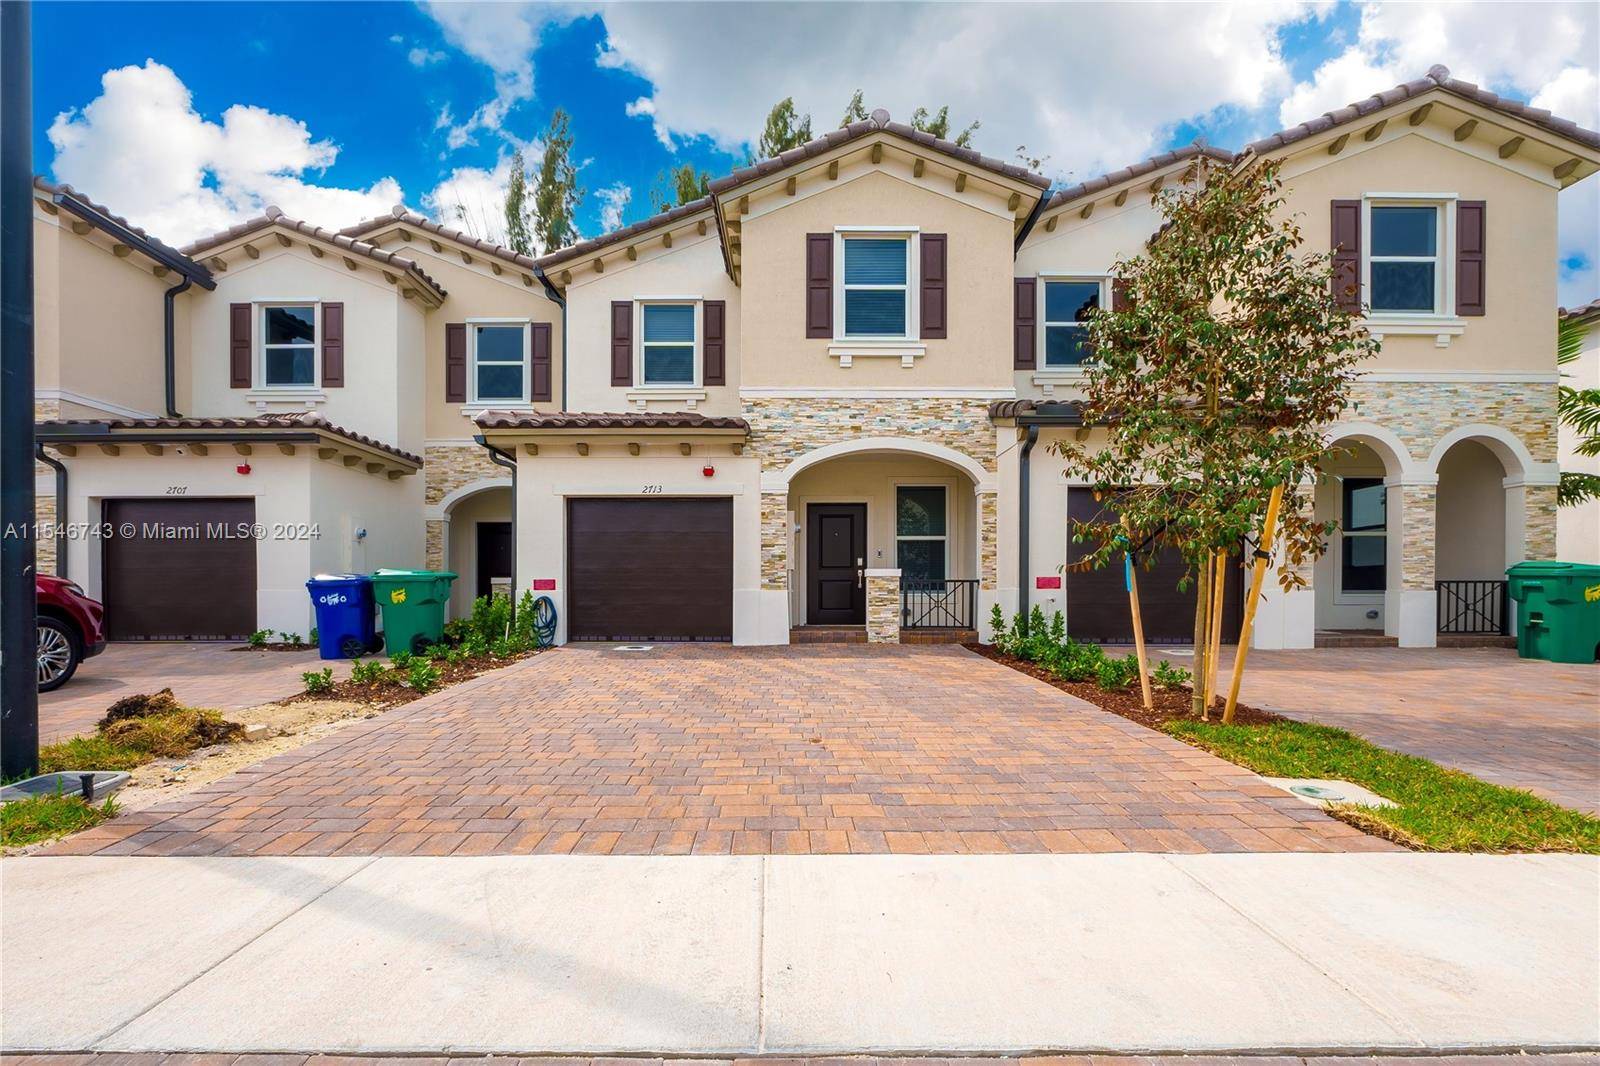 Brand new construction townhouse nestled within gated community offers an unparalleled residential experience.